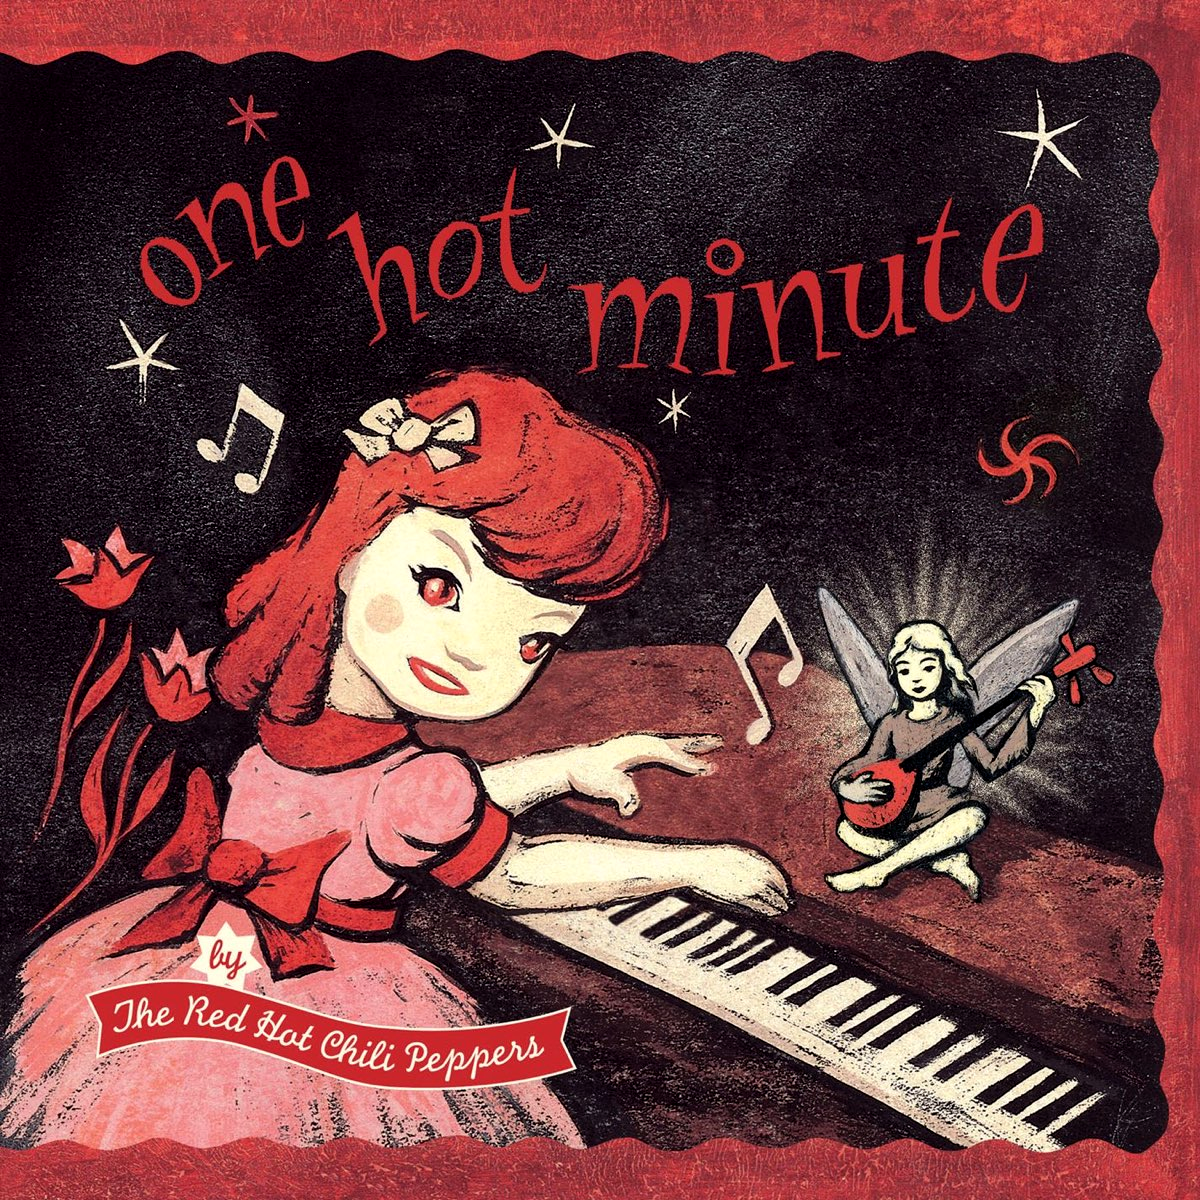 Red Hot Chili Peppers-One Hot Minute-CD-FLAC-1995-JLM Download